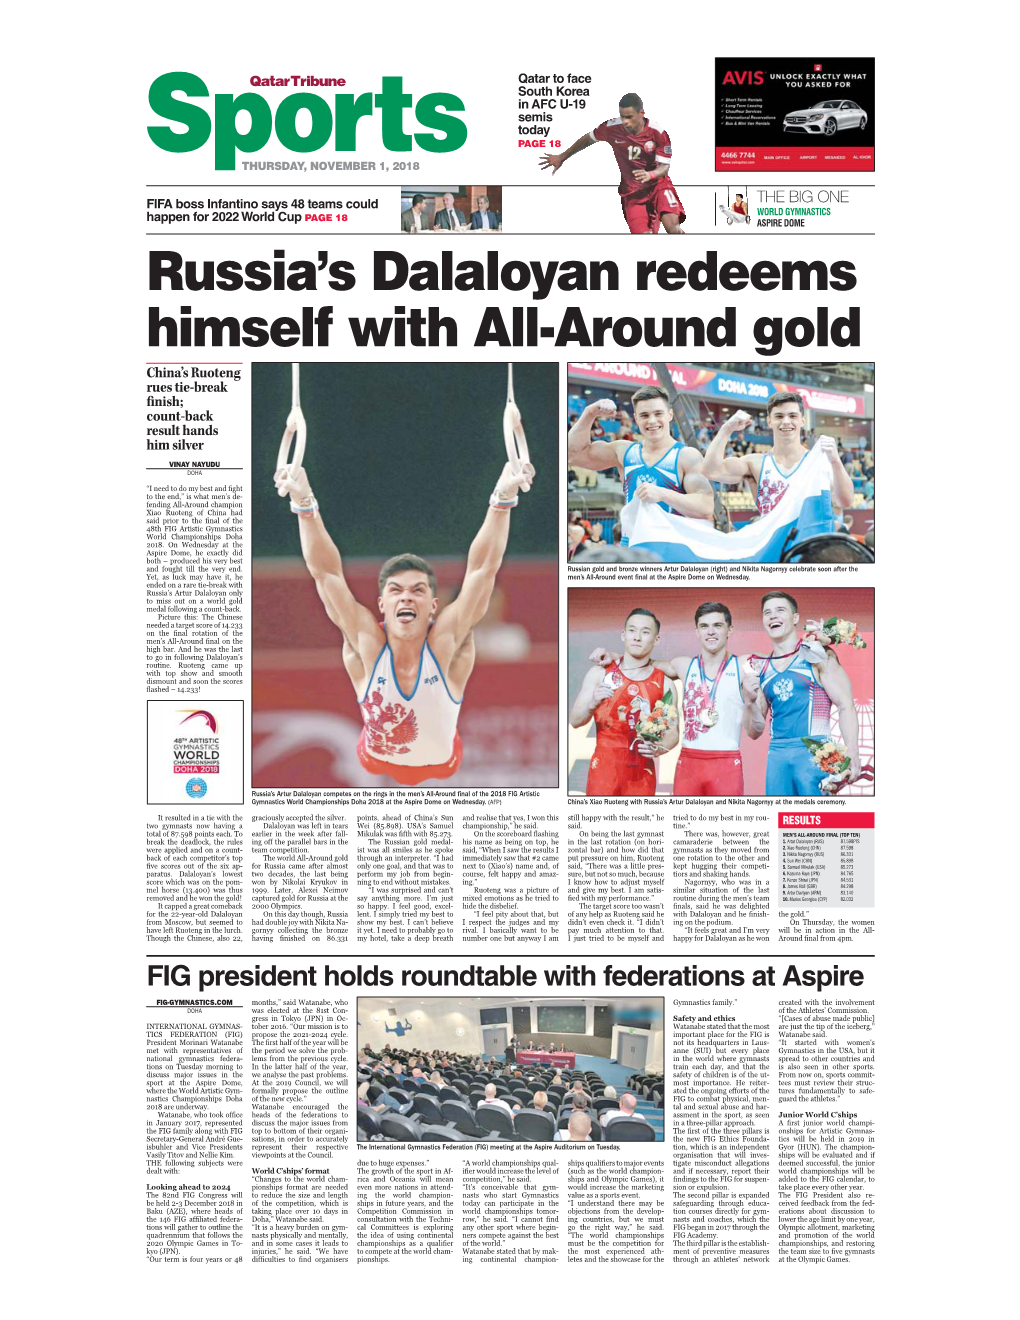 Russia's Dalaloyan Redeems Himself with All-Around Gold